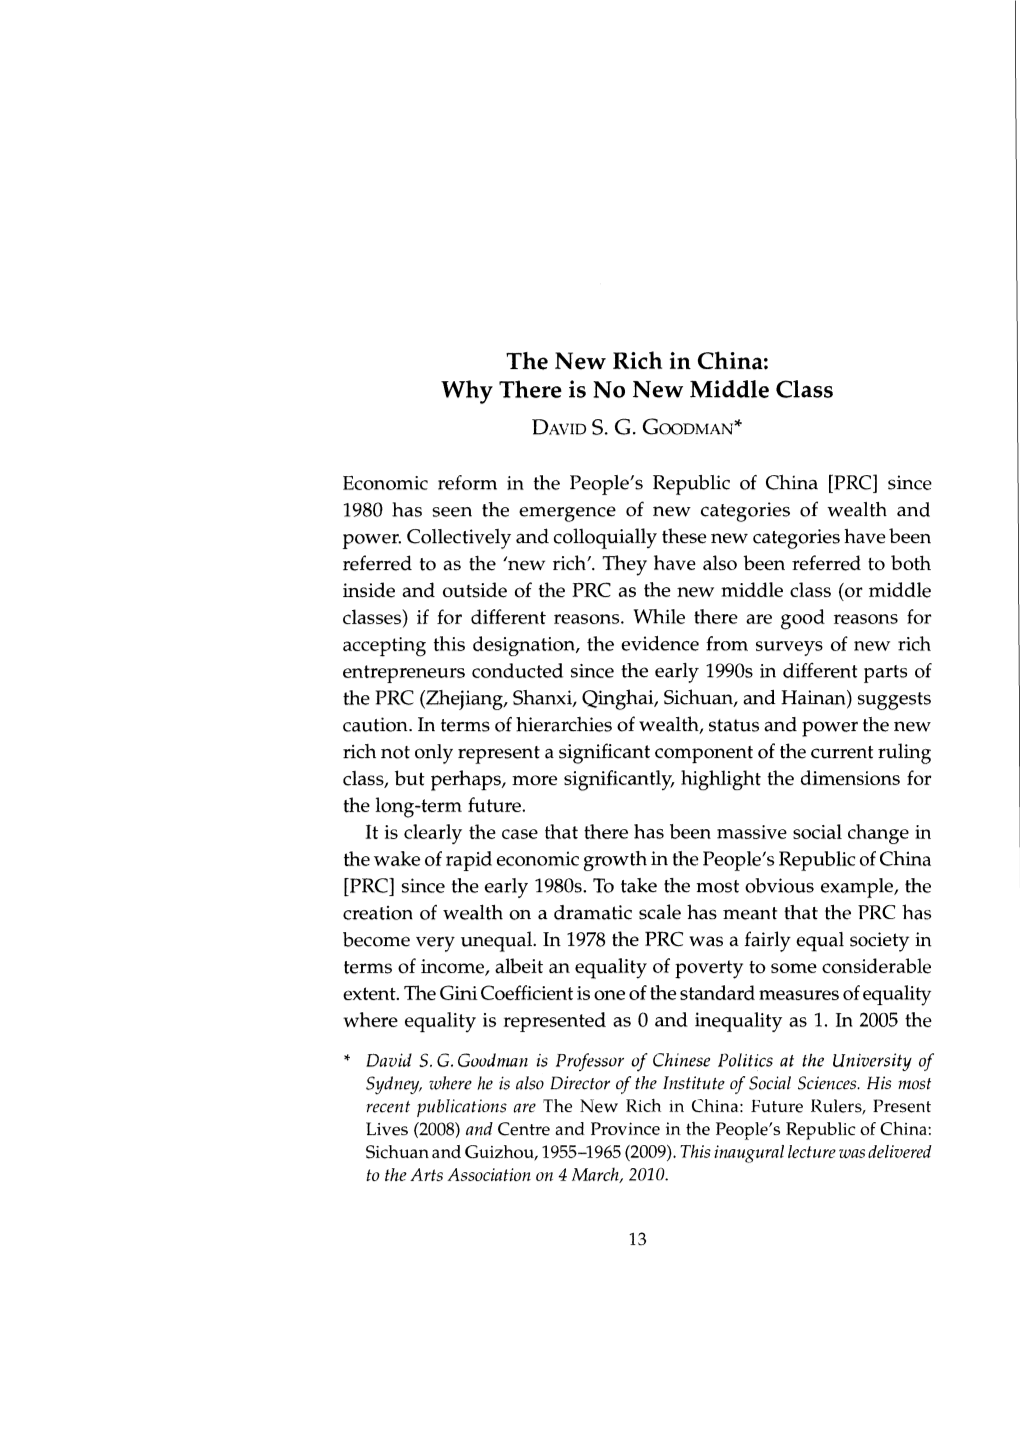 The New Rich in China: Why There Is No New Middle Class